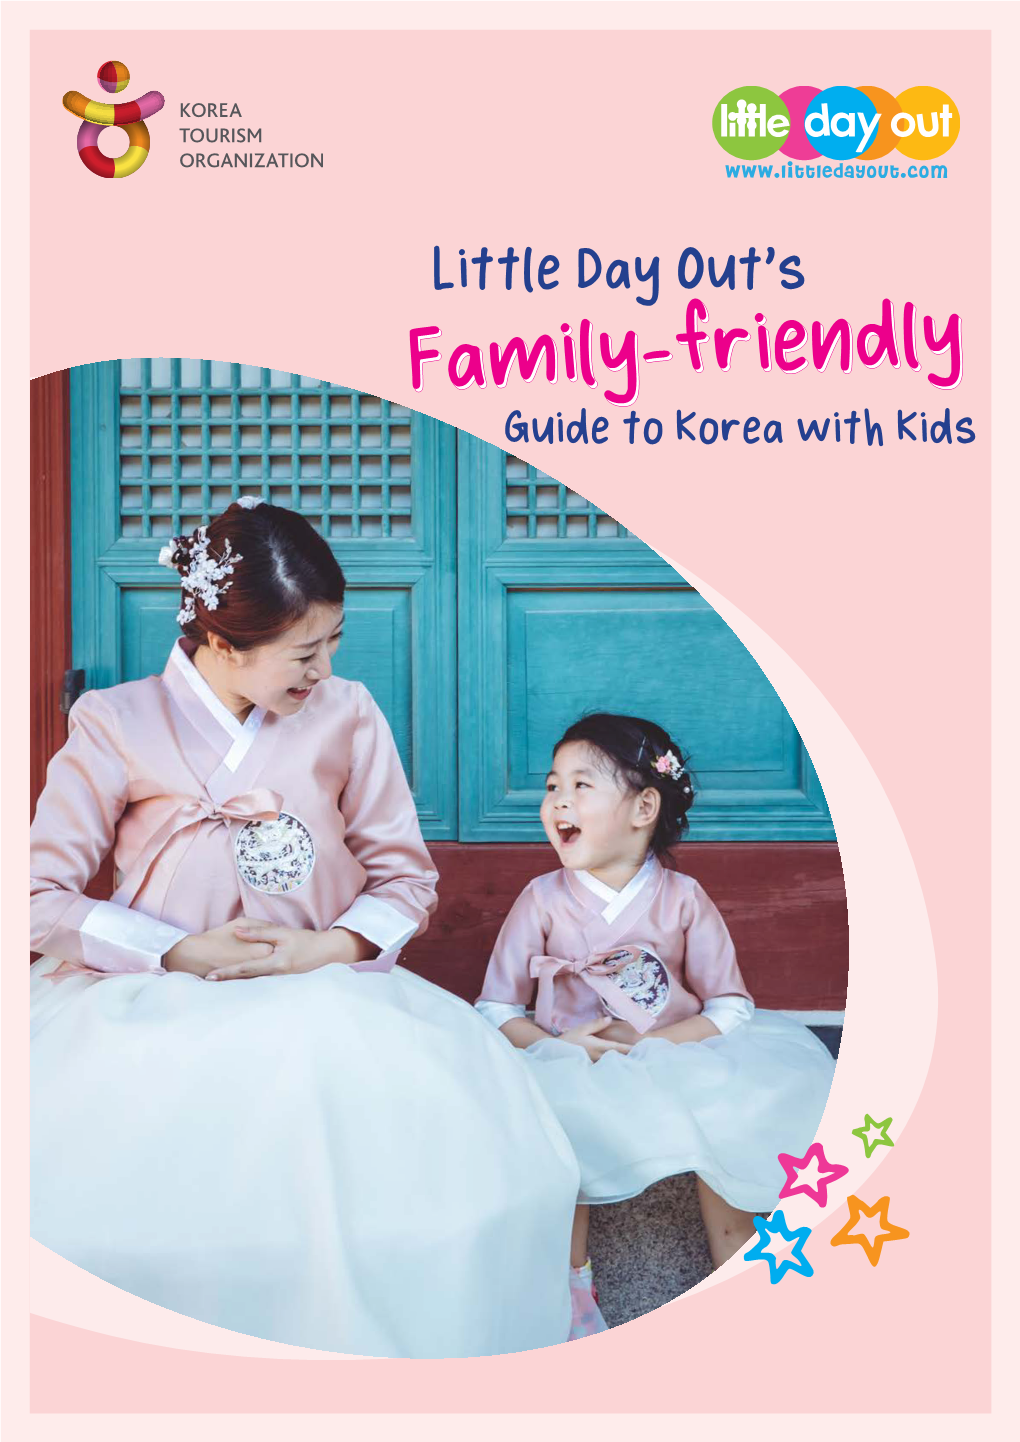 Little Day Out's Family-Friendly Guide to Korea with Kids